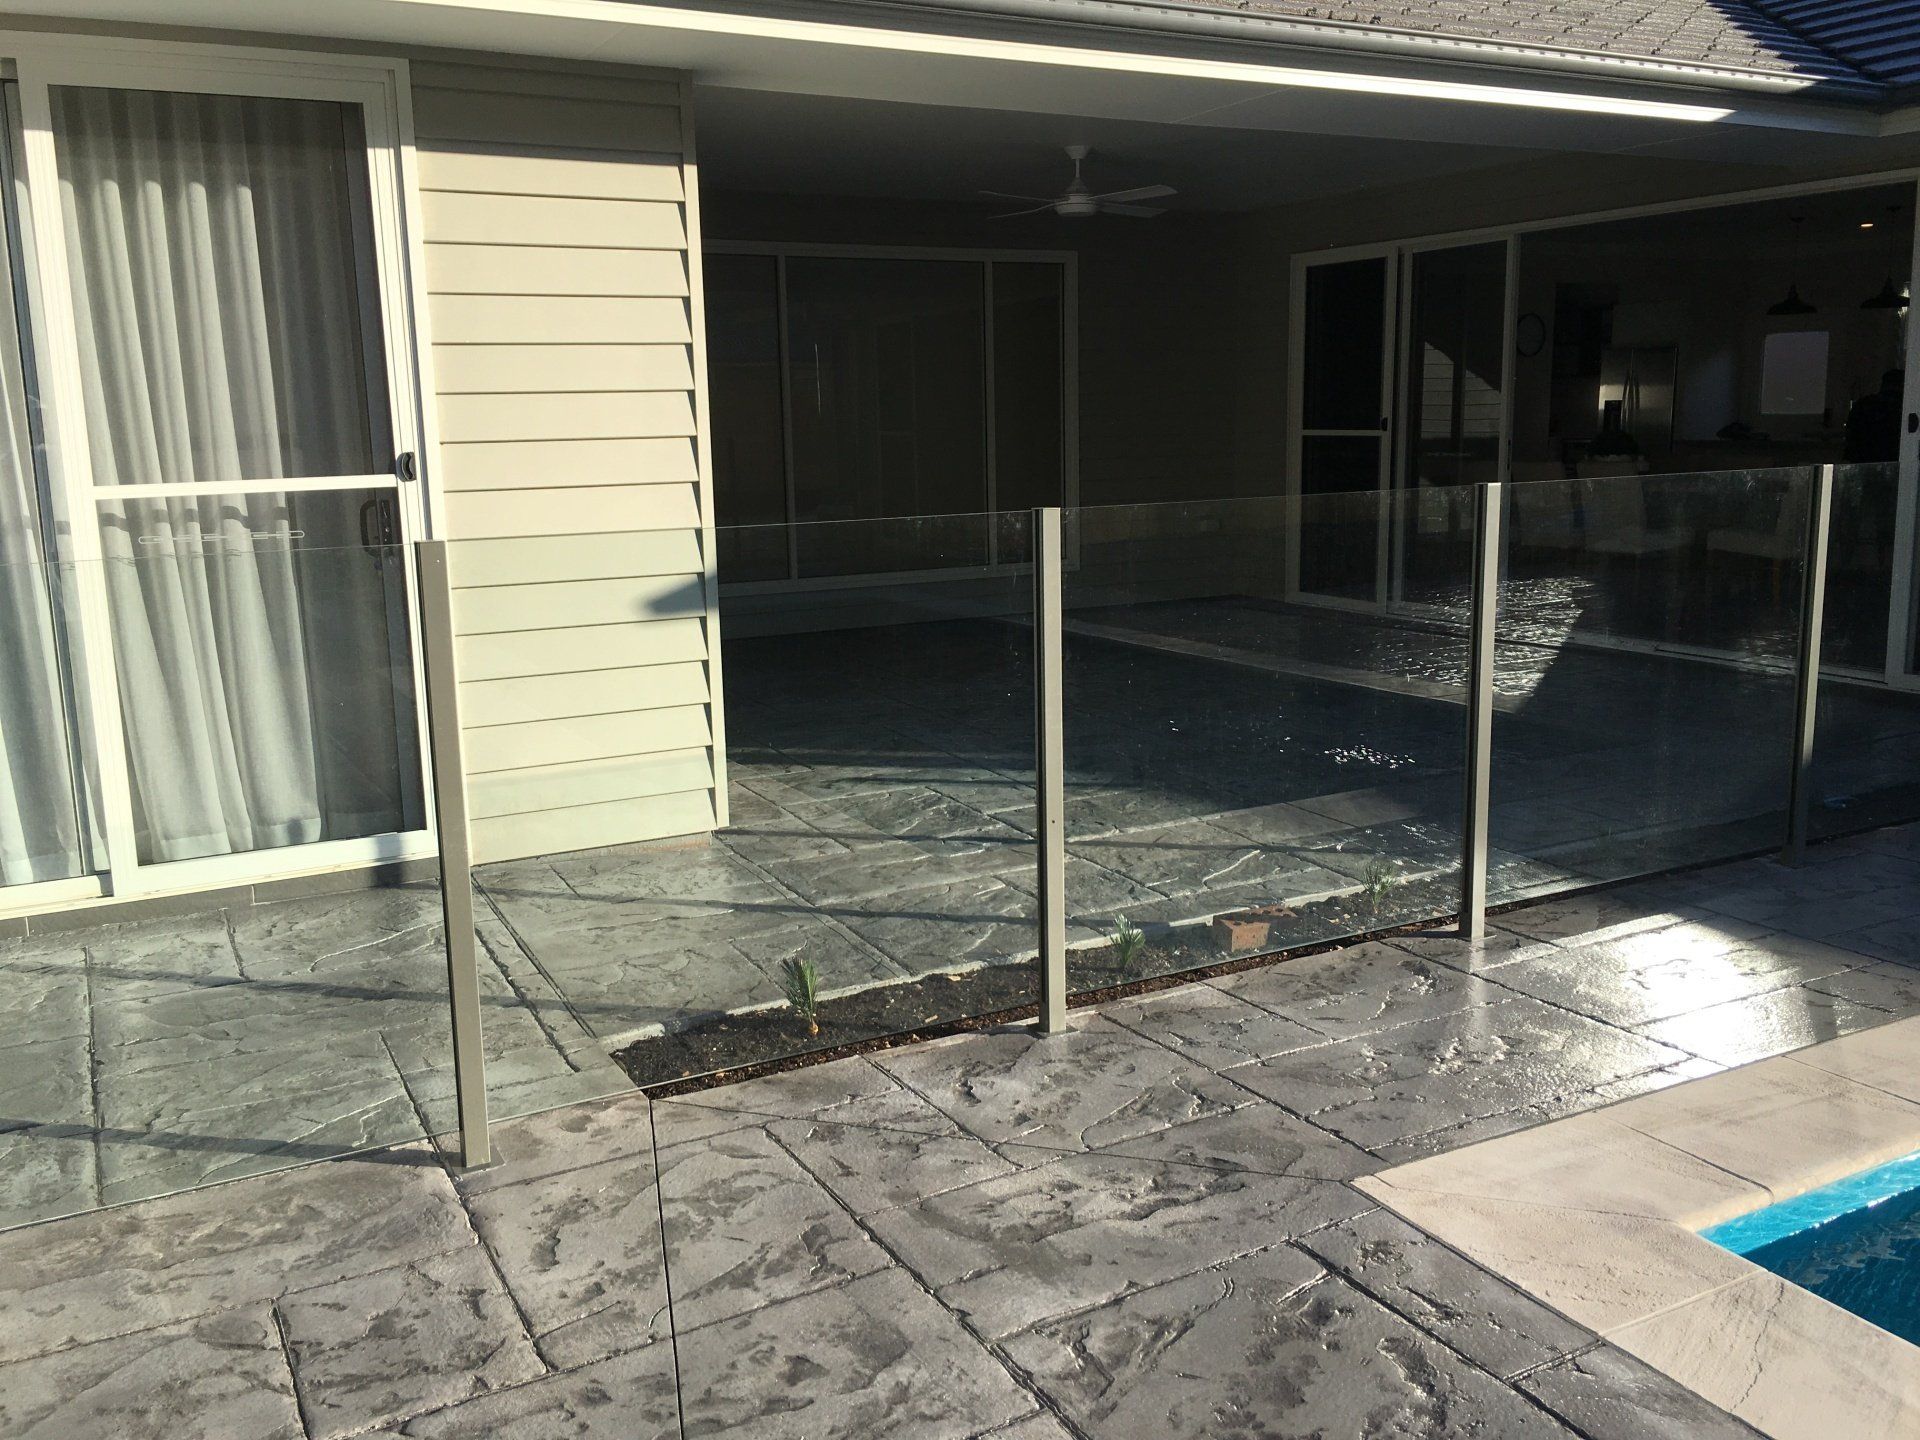 Stencilled Concrete Pool Area  — About Us in Port Macquarie, NSW